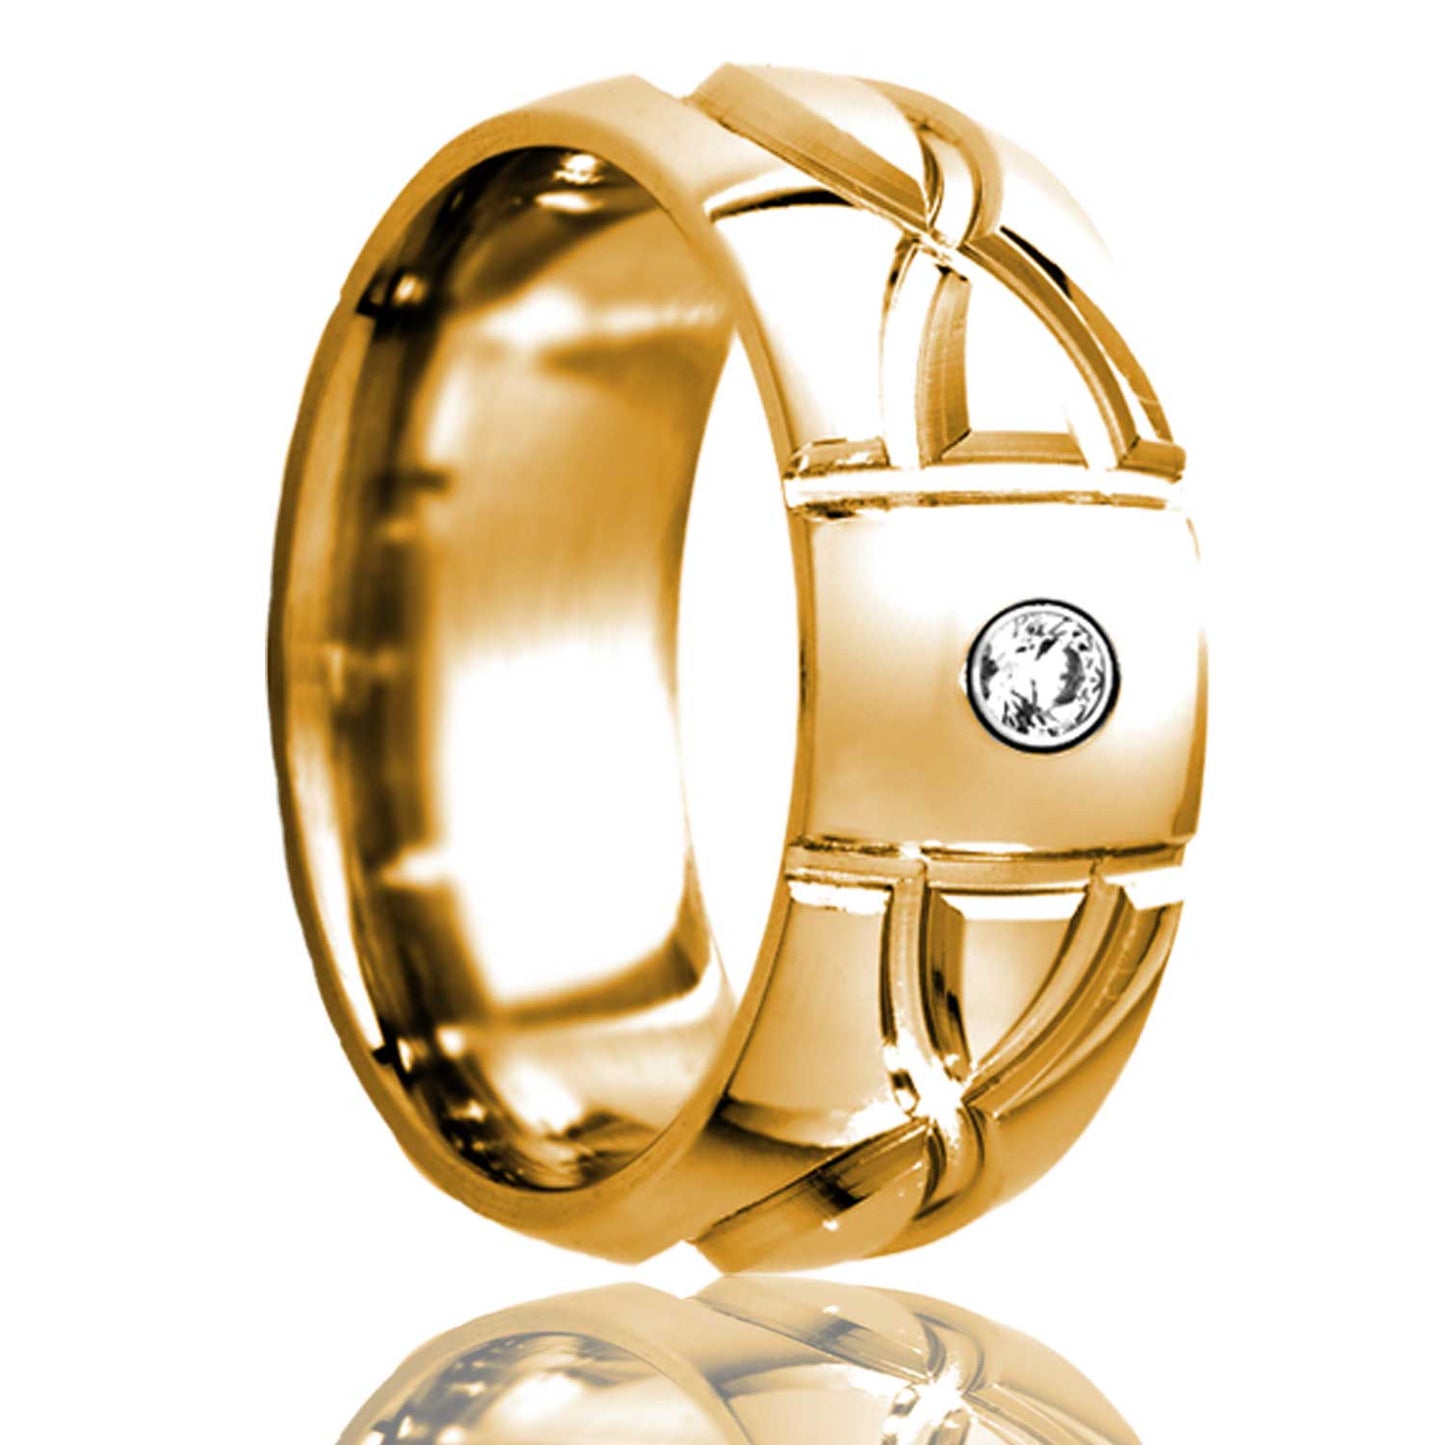 A infinity waves domed 14k gold wedding band with diamond displayed on a neutral white background.